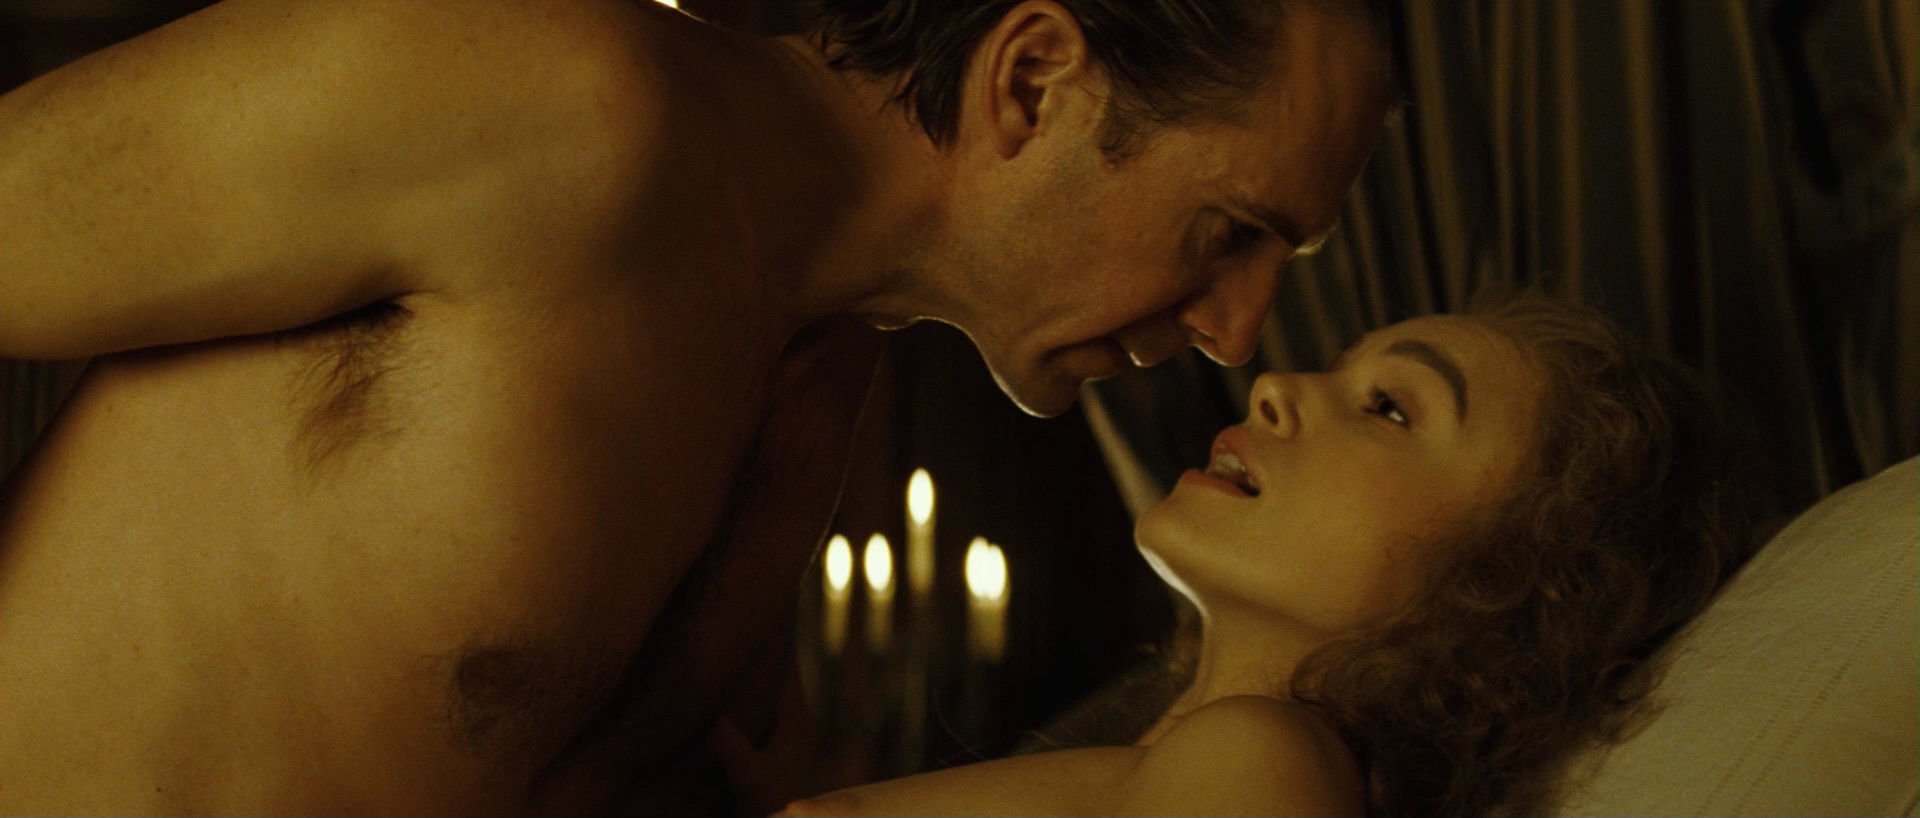 Keira Knightley Nude The Duchess Pics Gif Video Thefappening